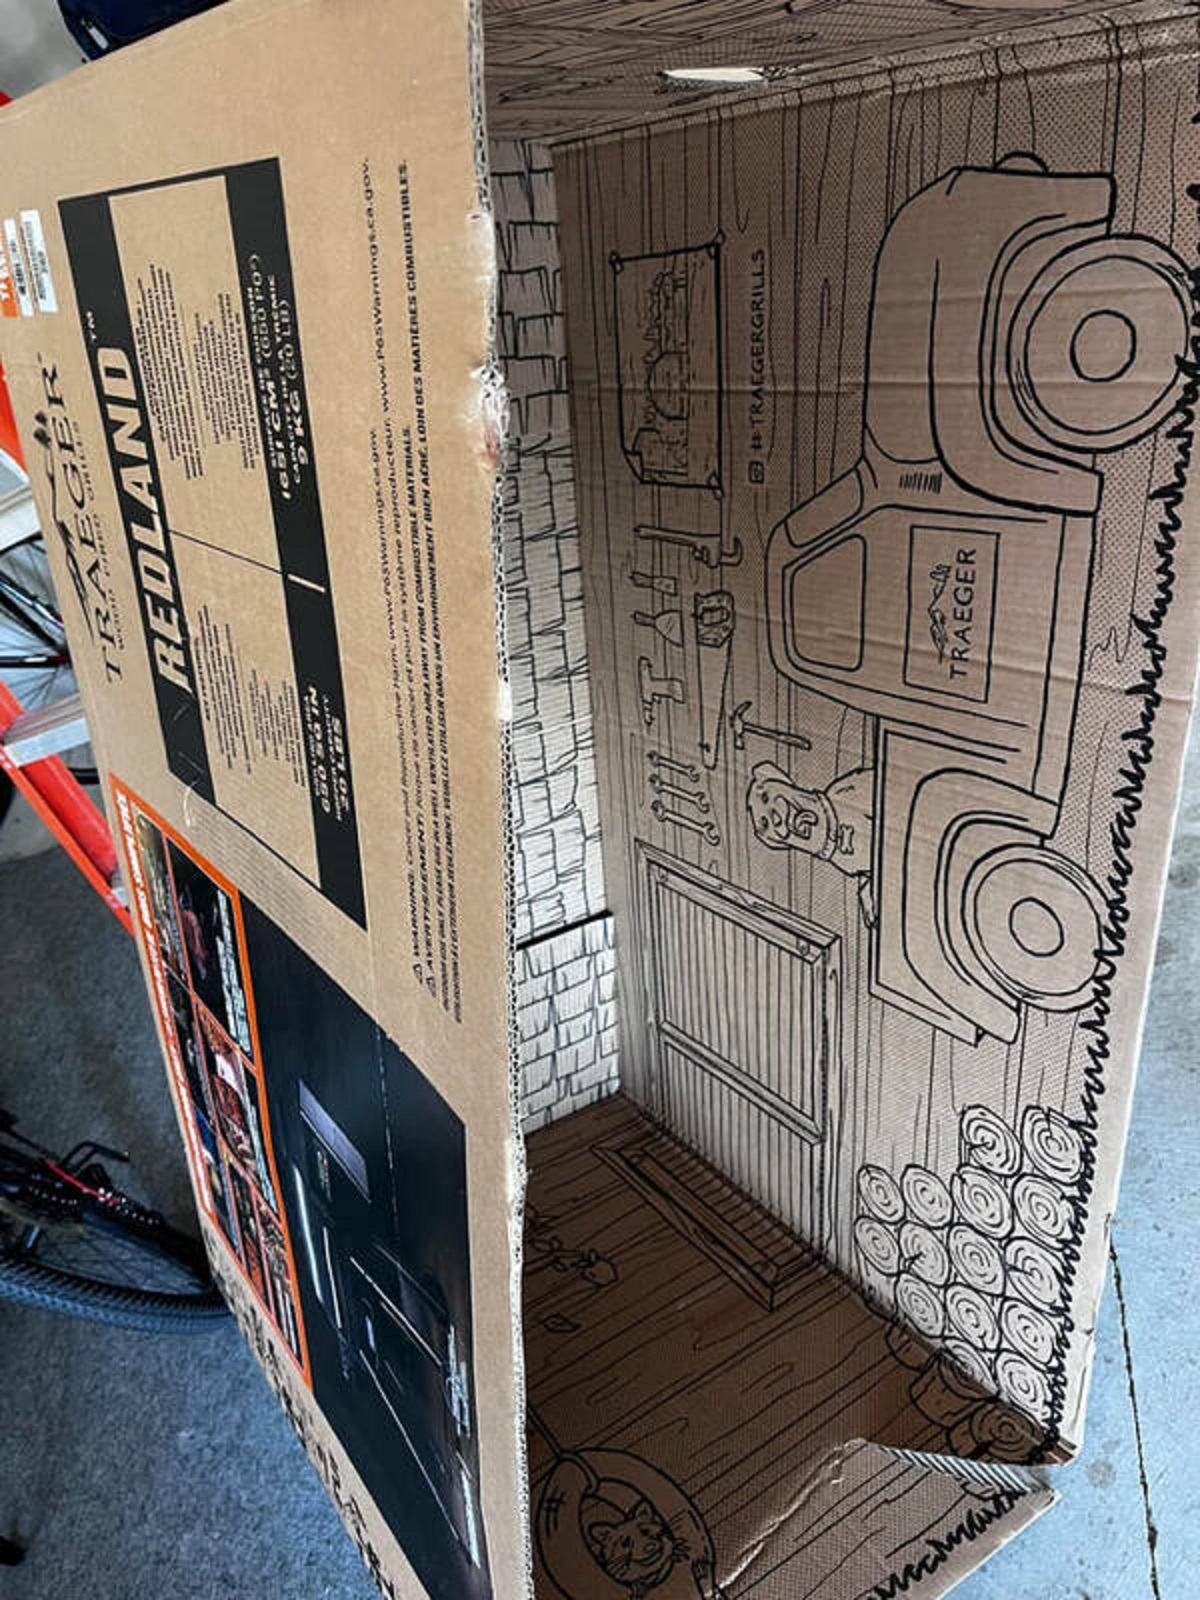 "The inside of a Traeger Grill box is printed as a playhouse."